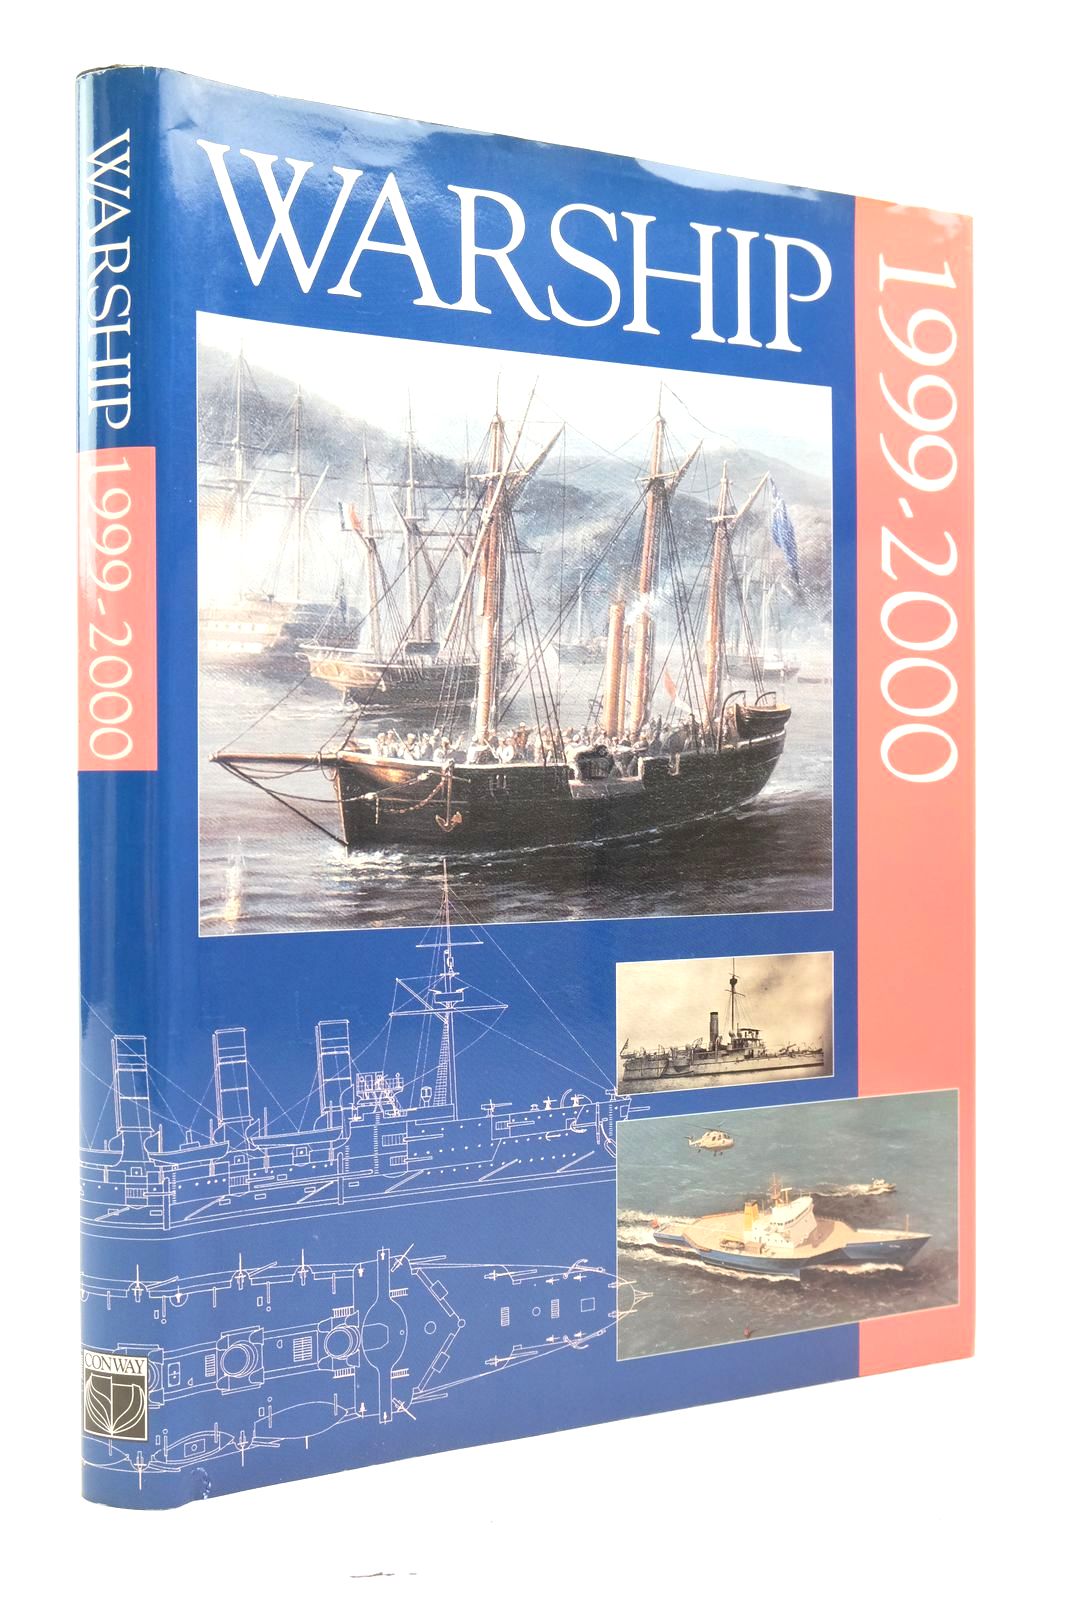 Photo of WARSHIP 1999-2000 written by Preston, Antony Brook, Peter et al, published by Conway Maritime Press (STOCK CODE: 2139850)  for sale by Stella & Rose's Books